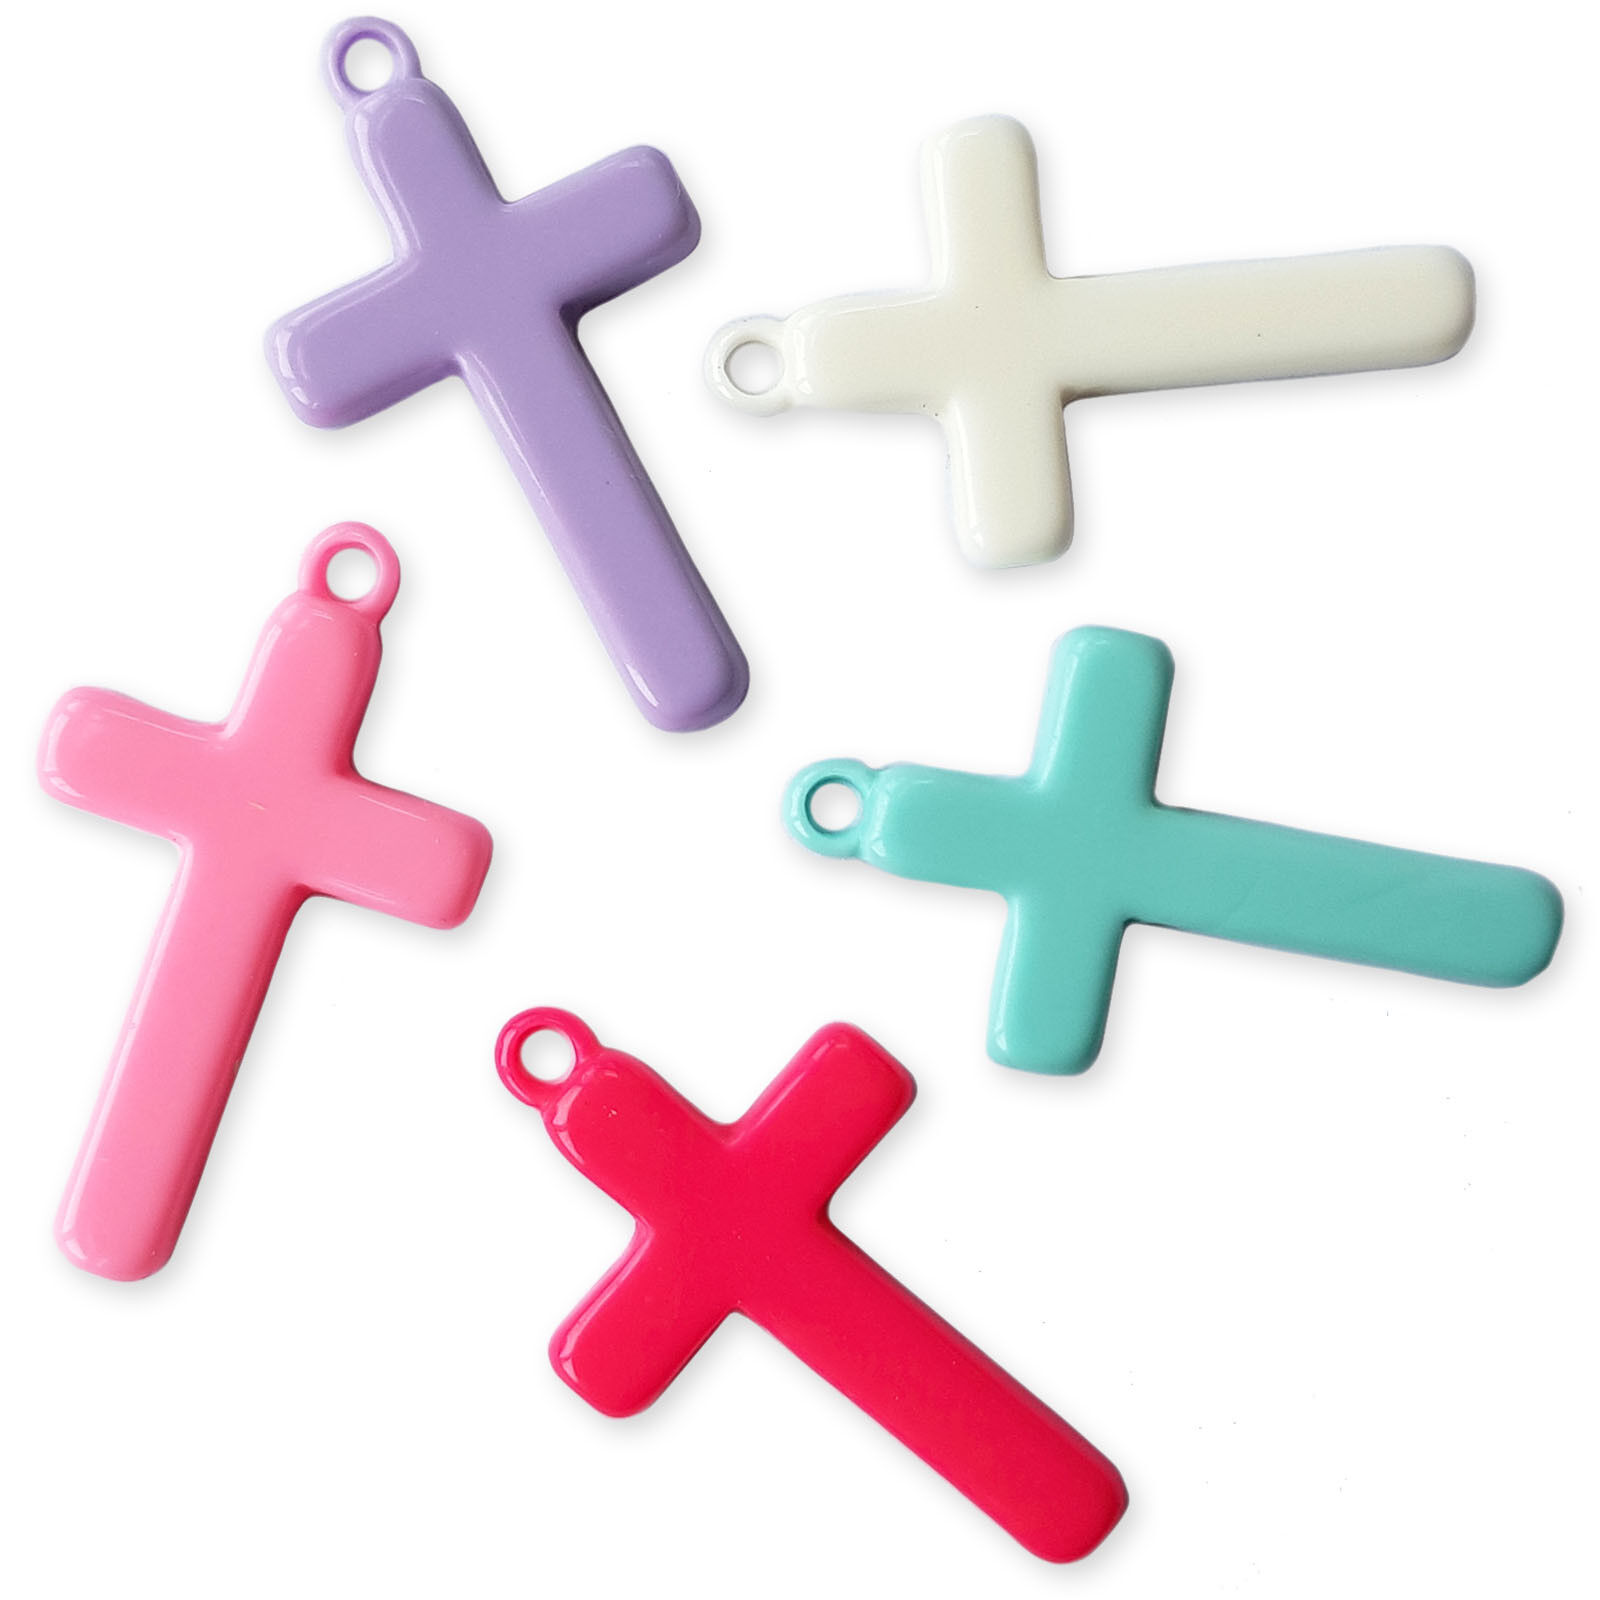 5pcs Complete overseas Free Shipping Resin Cross Pendant Embellishment Charms